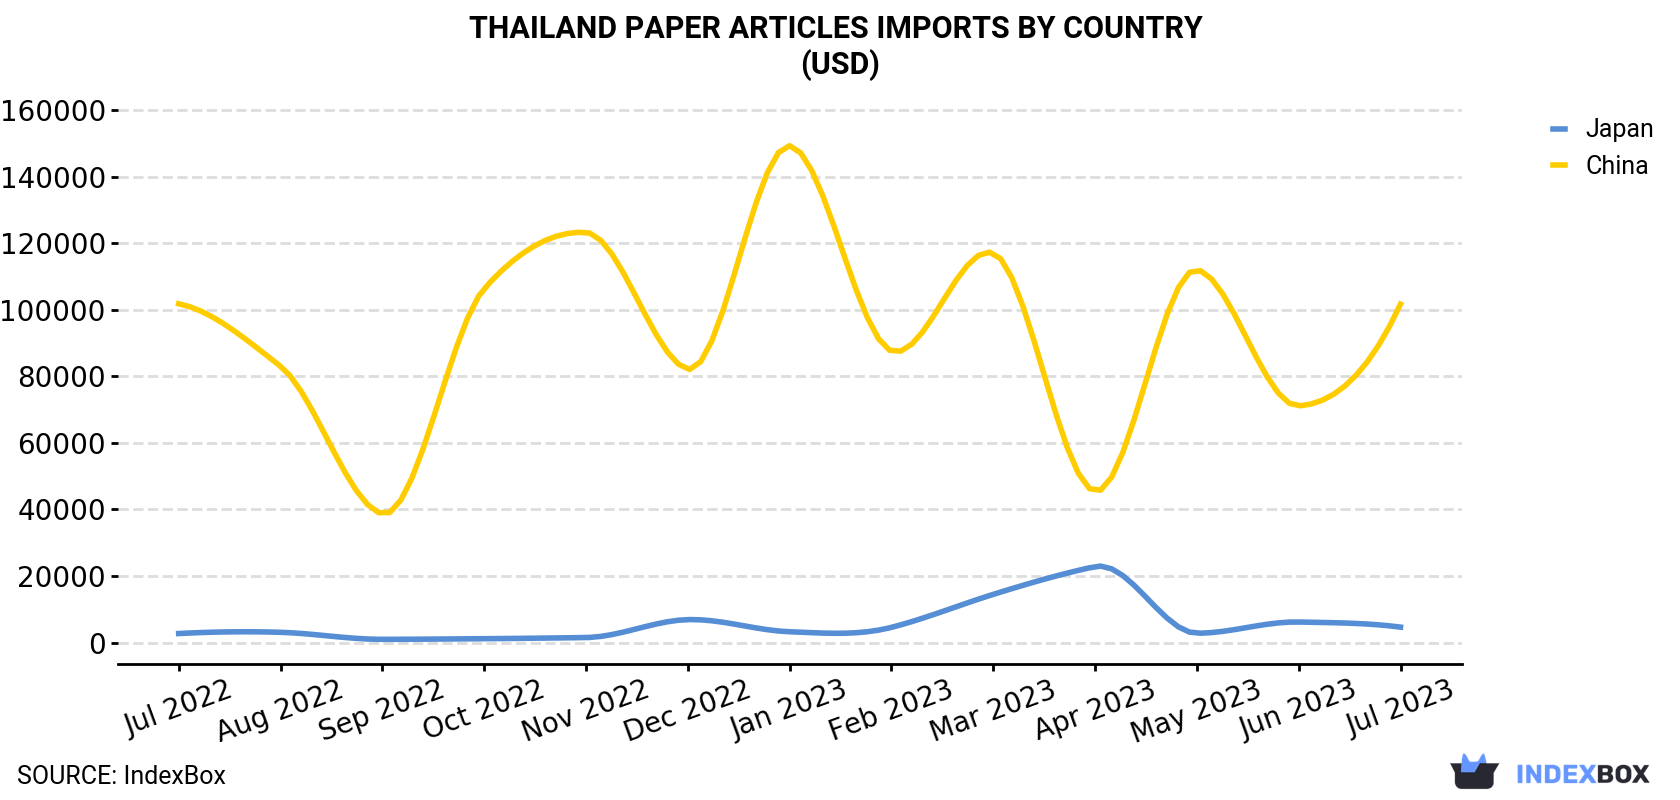 Thailand Paper Articles Imports By Country (USD)